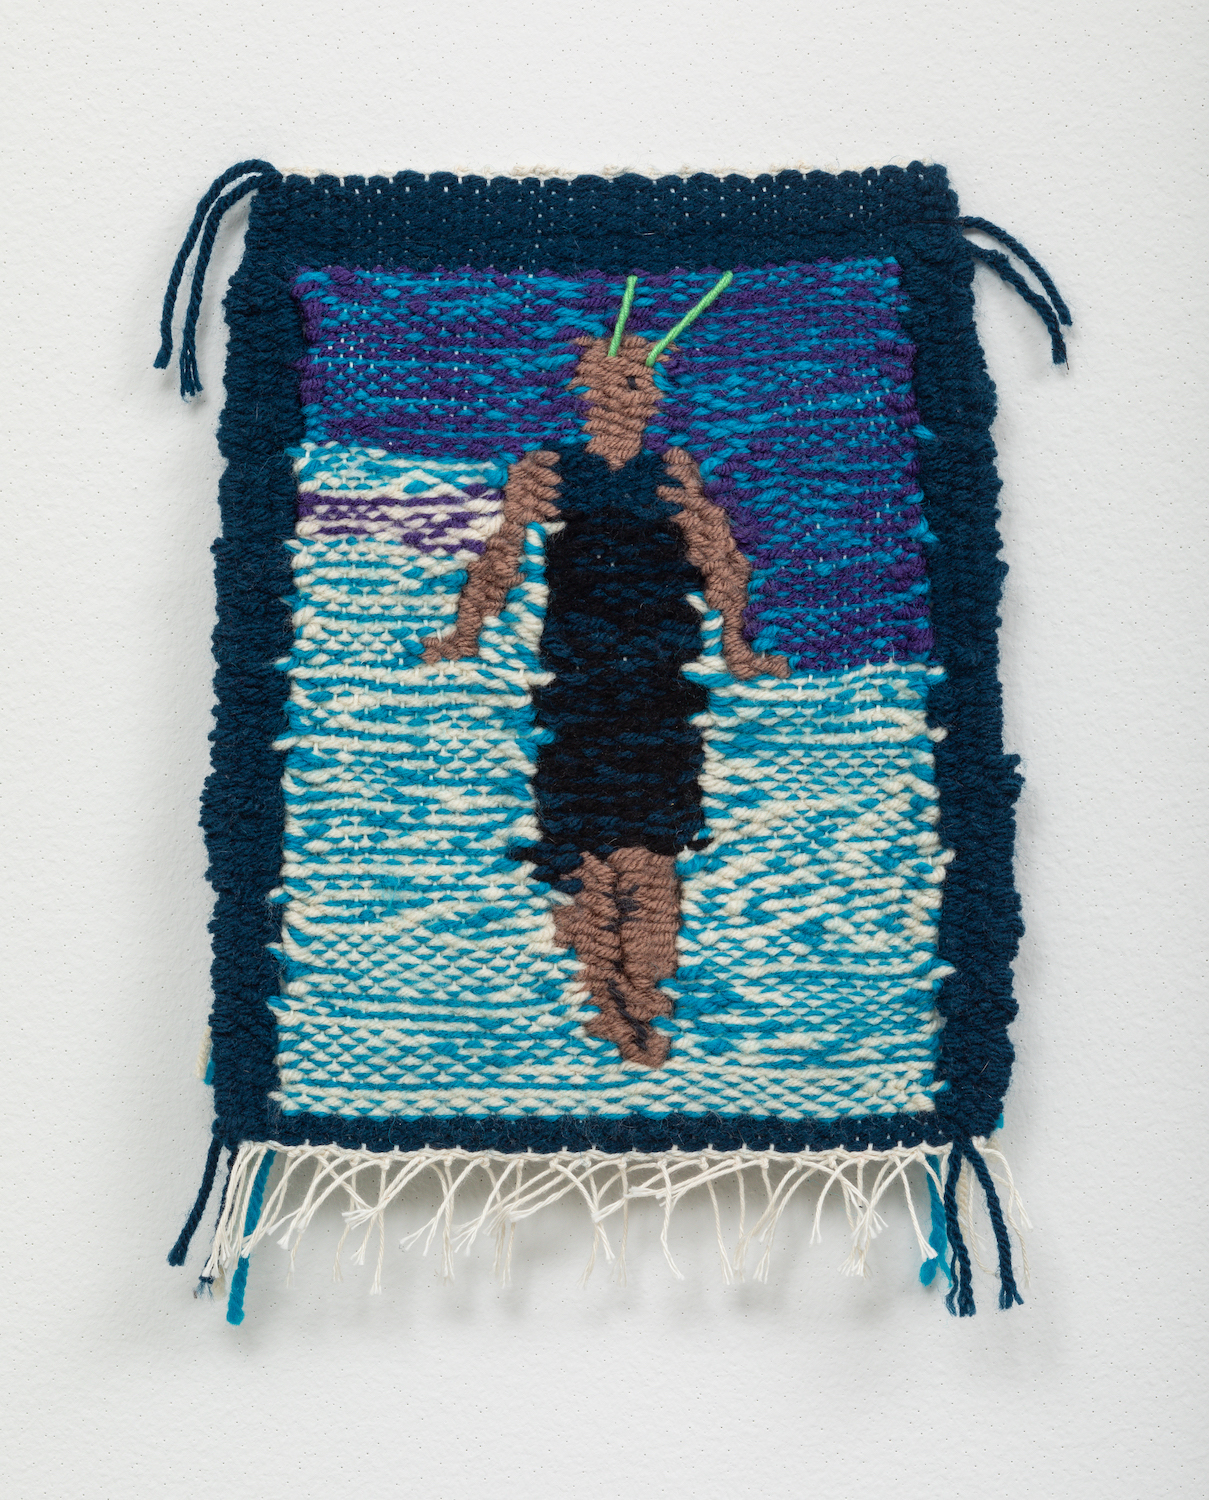 D'ANGELO LOVELL WILLIAMS, In Flux, 2023,  cotton yarn, acrylic yarn, 11 x 8.5 inches, unique